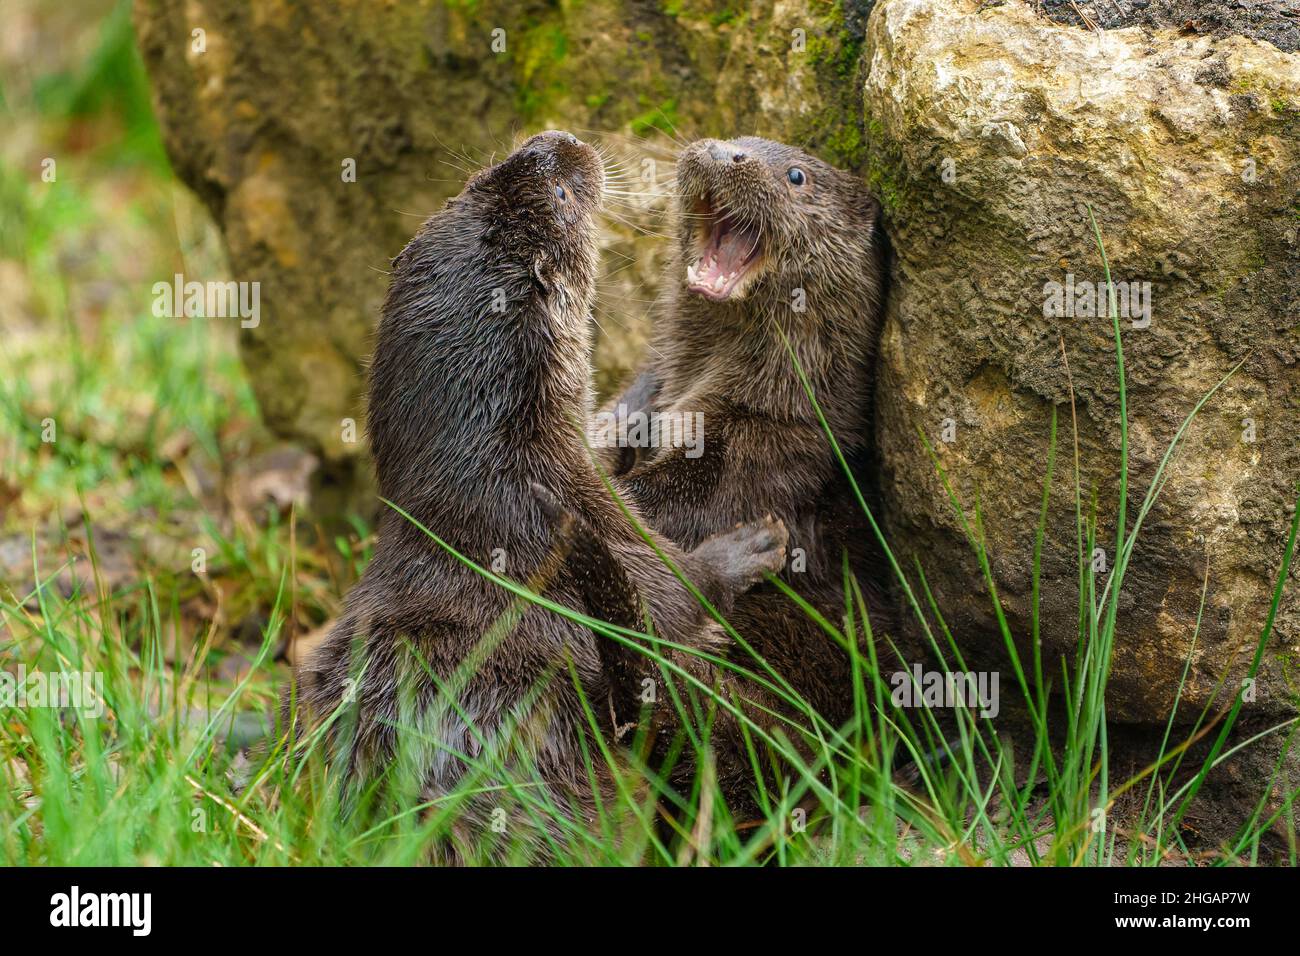 Two young european otter (Lutra lutra), playing on a rock, captive Stock Photo